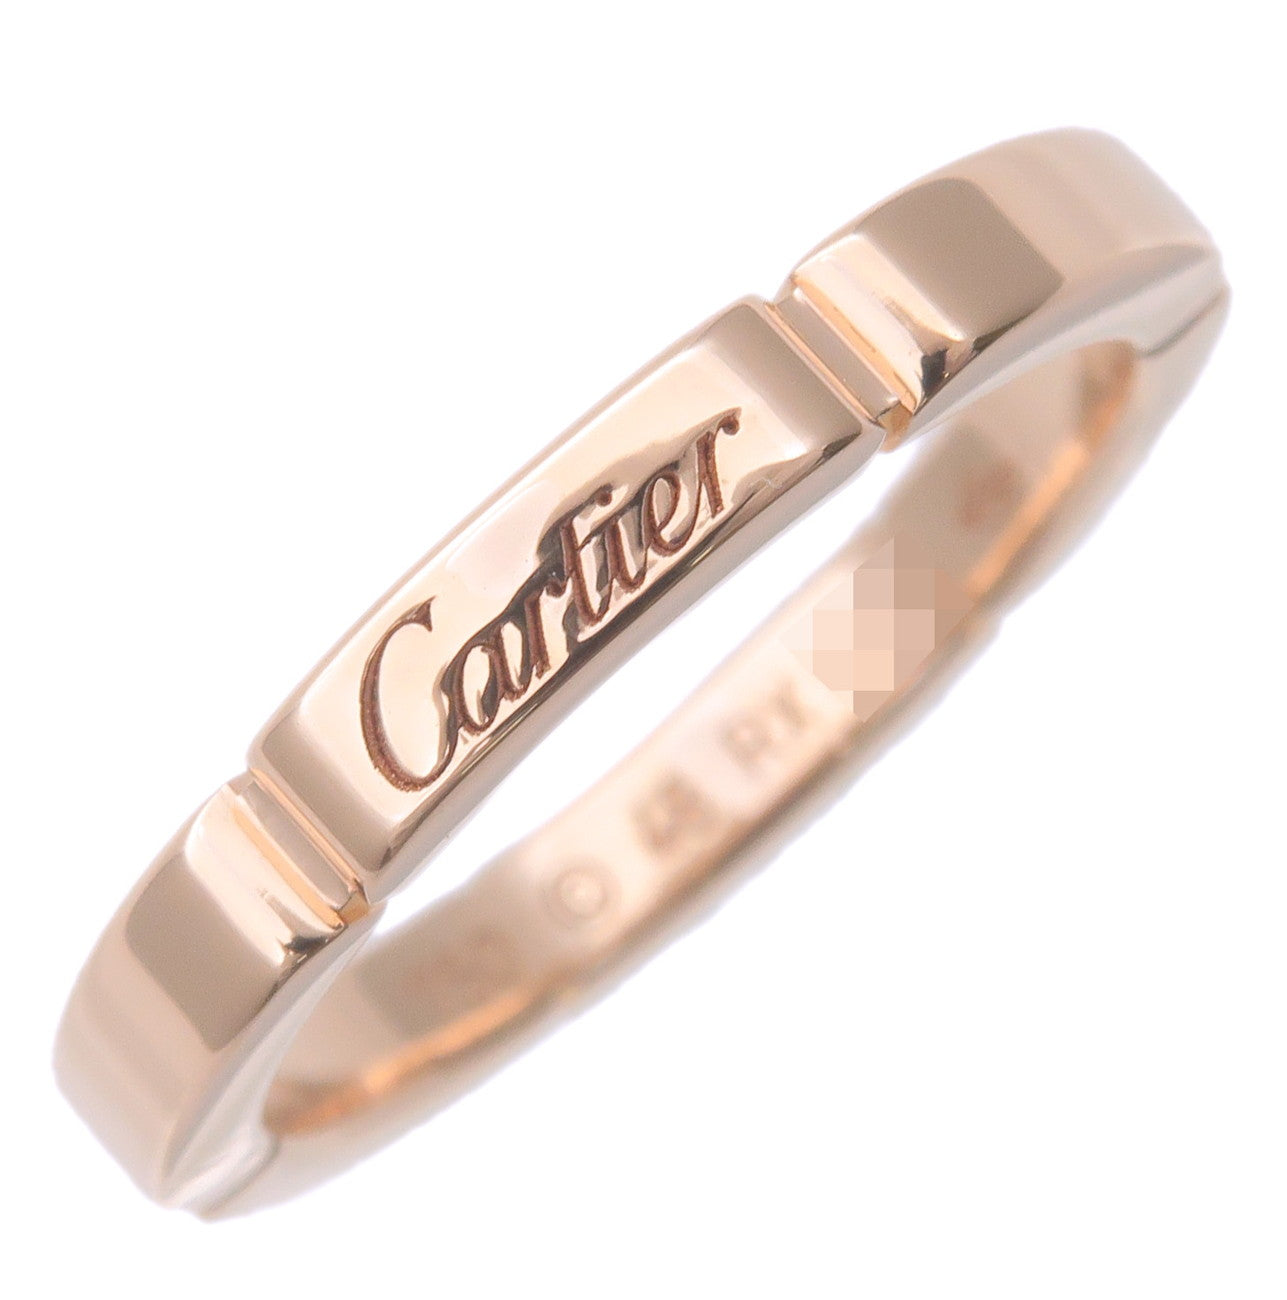 Cartier-Maillon-Panthere-Ring-K18-750PG-Rose-Gold-#48-US4.5